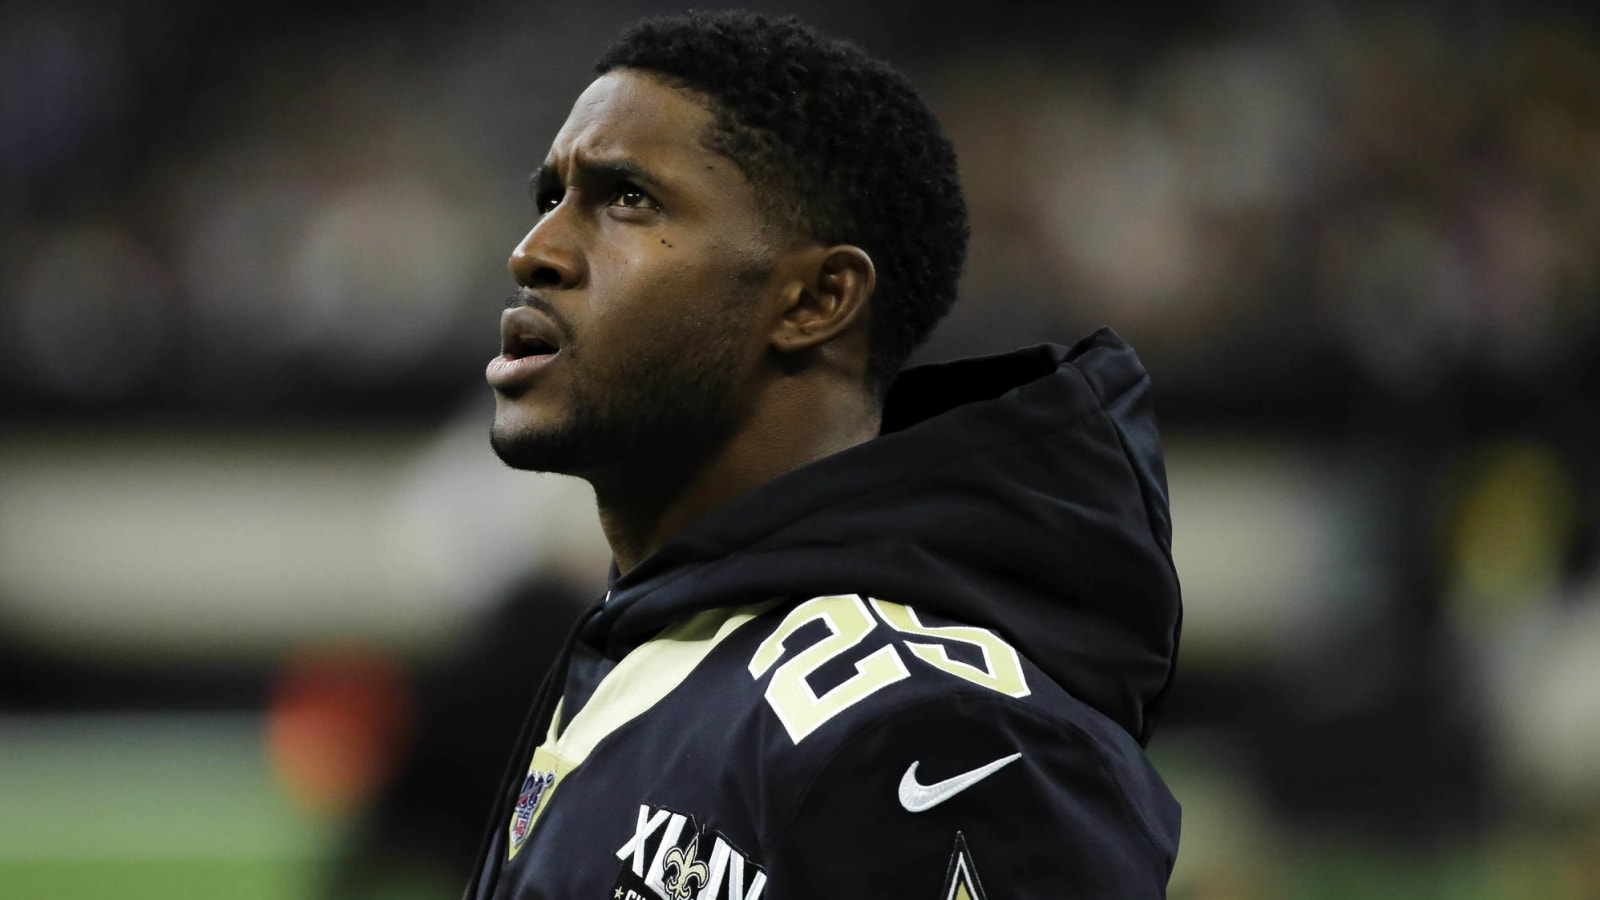 Reggie Bush accuses ESPN of 'clickbait' after comments on college athletes